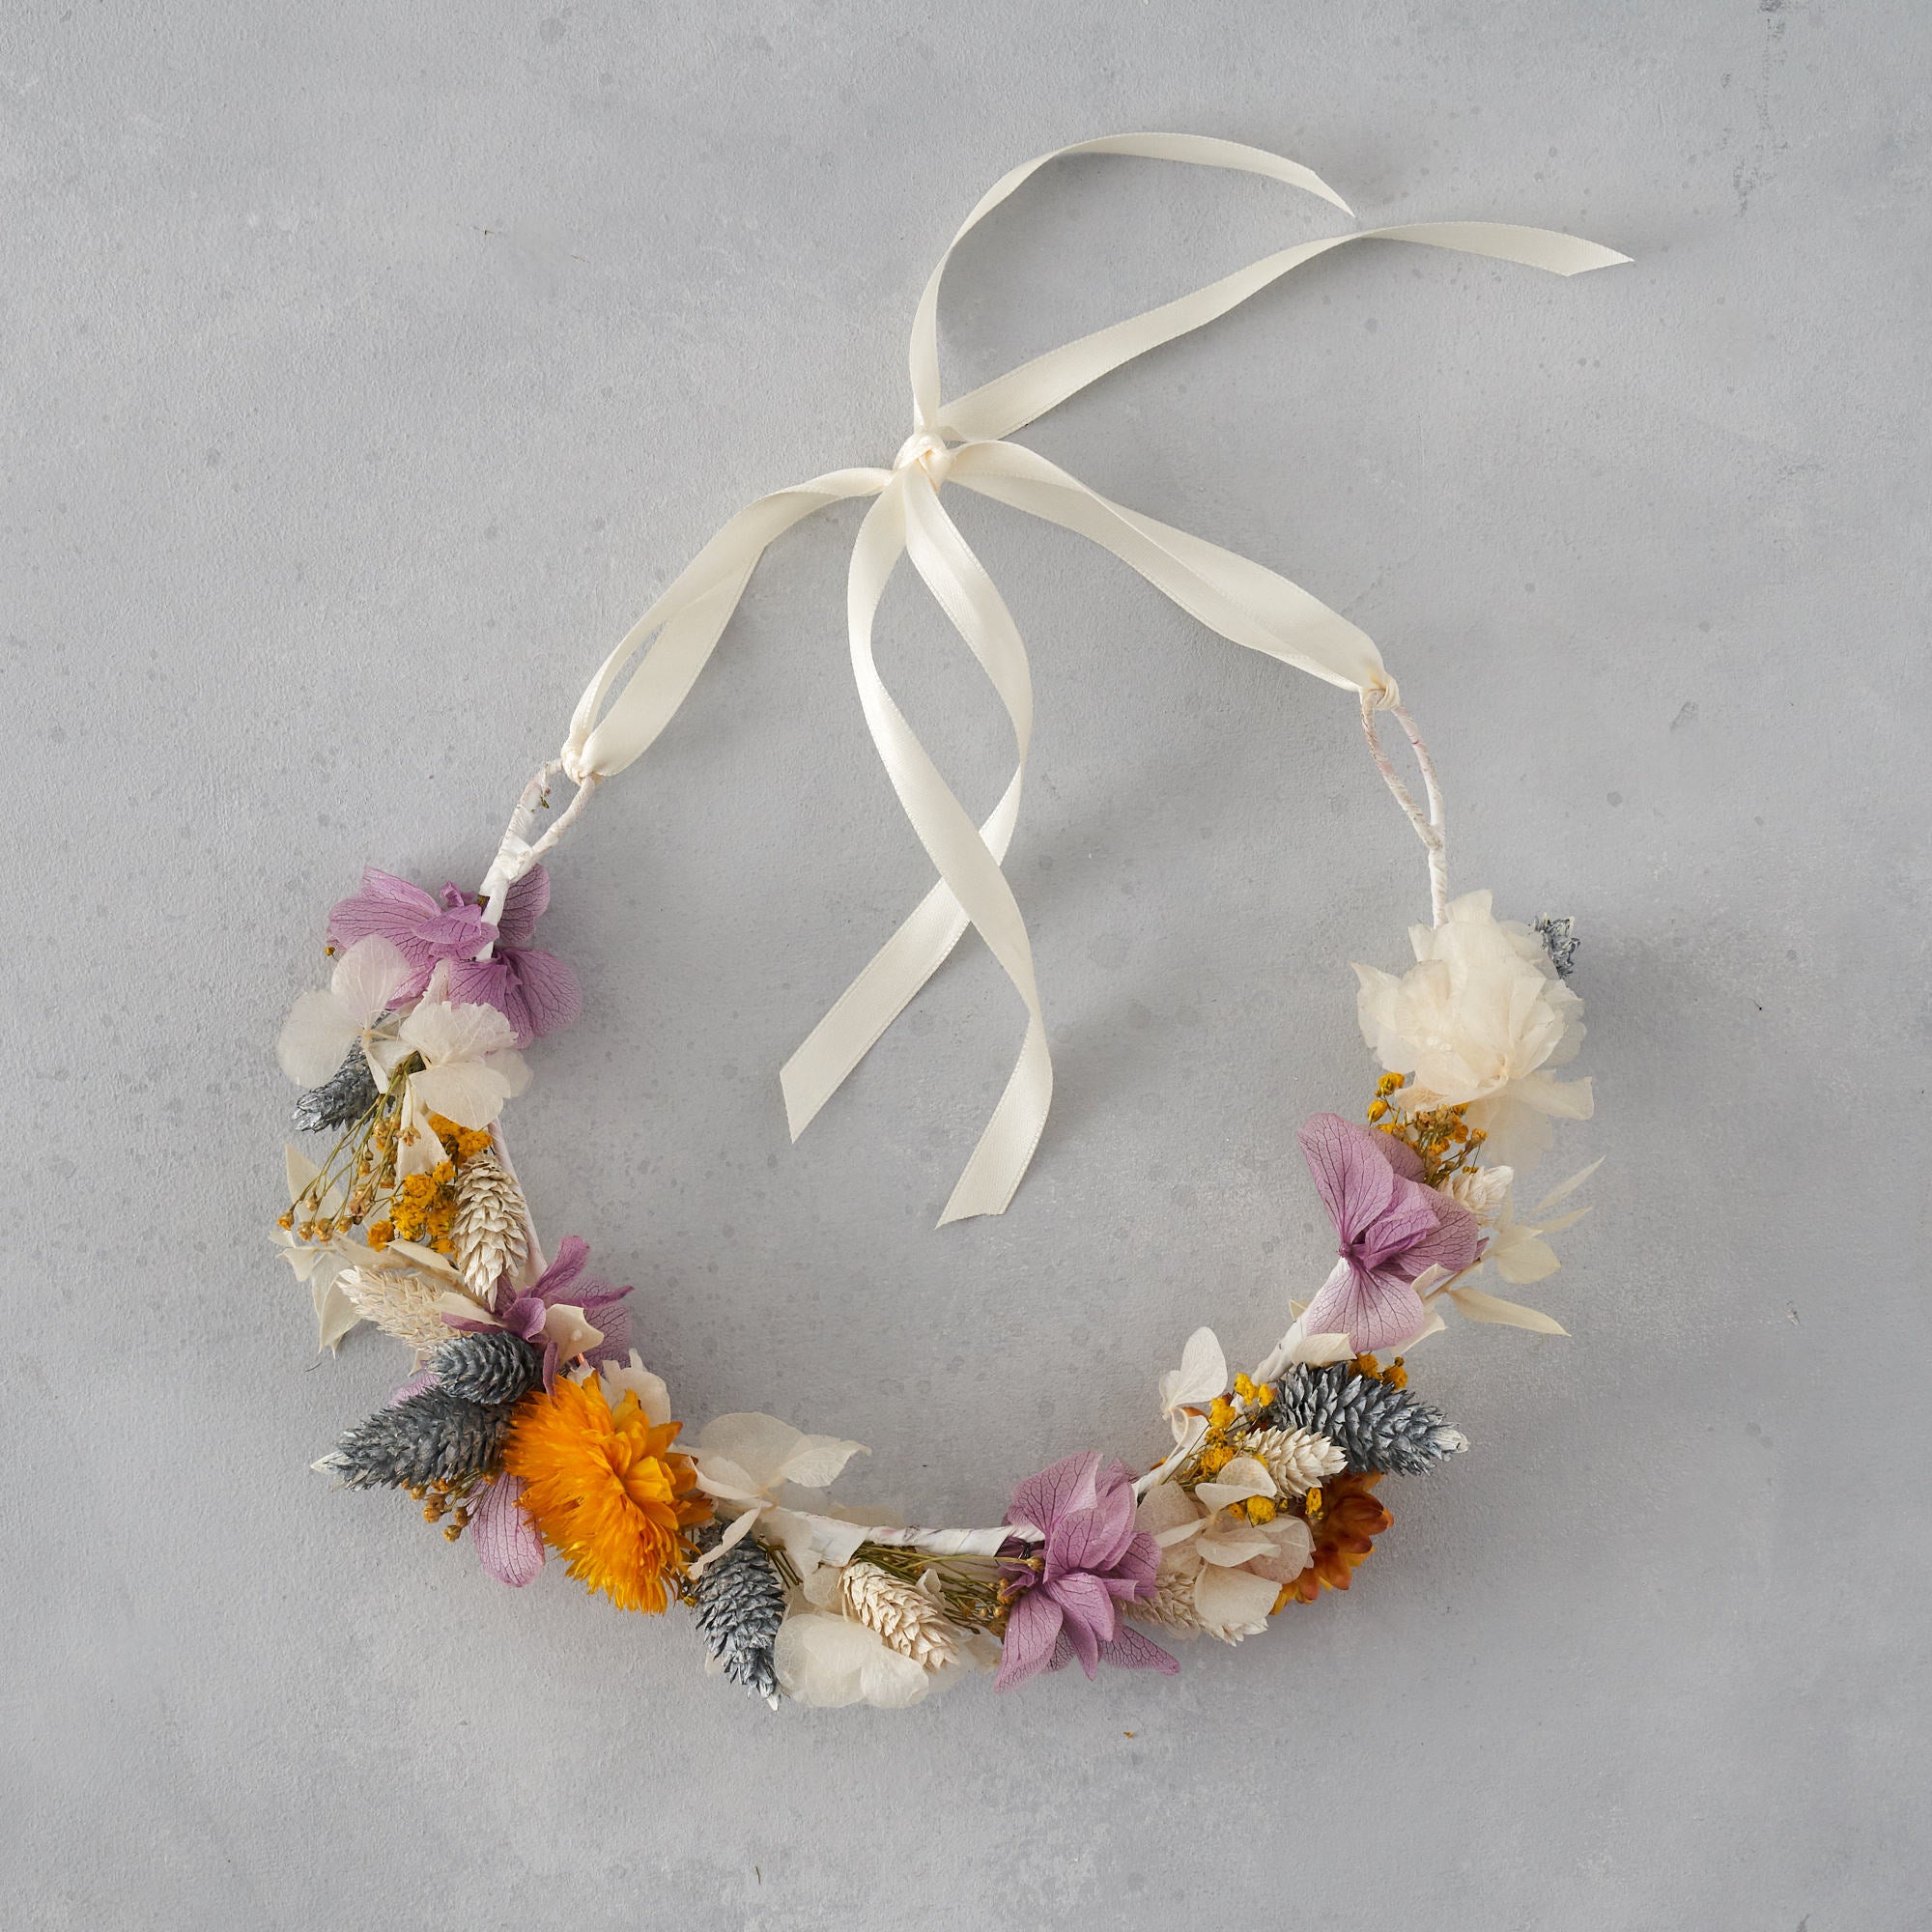 Dried flower crown : dusty lilac and sunshine yellow